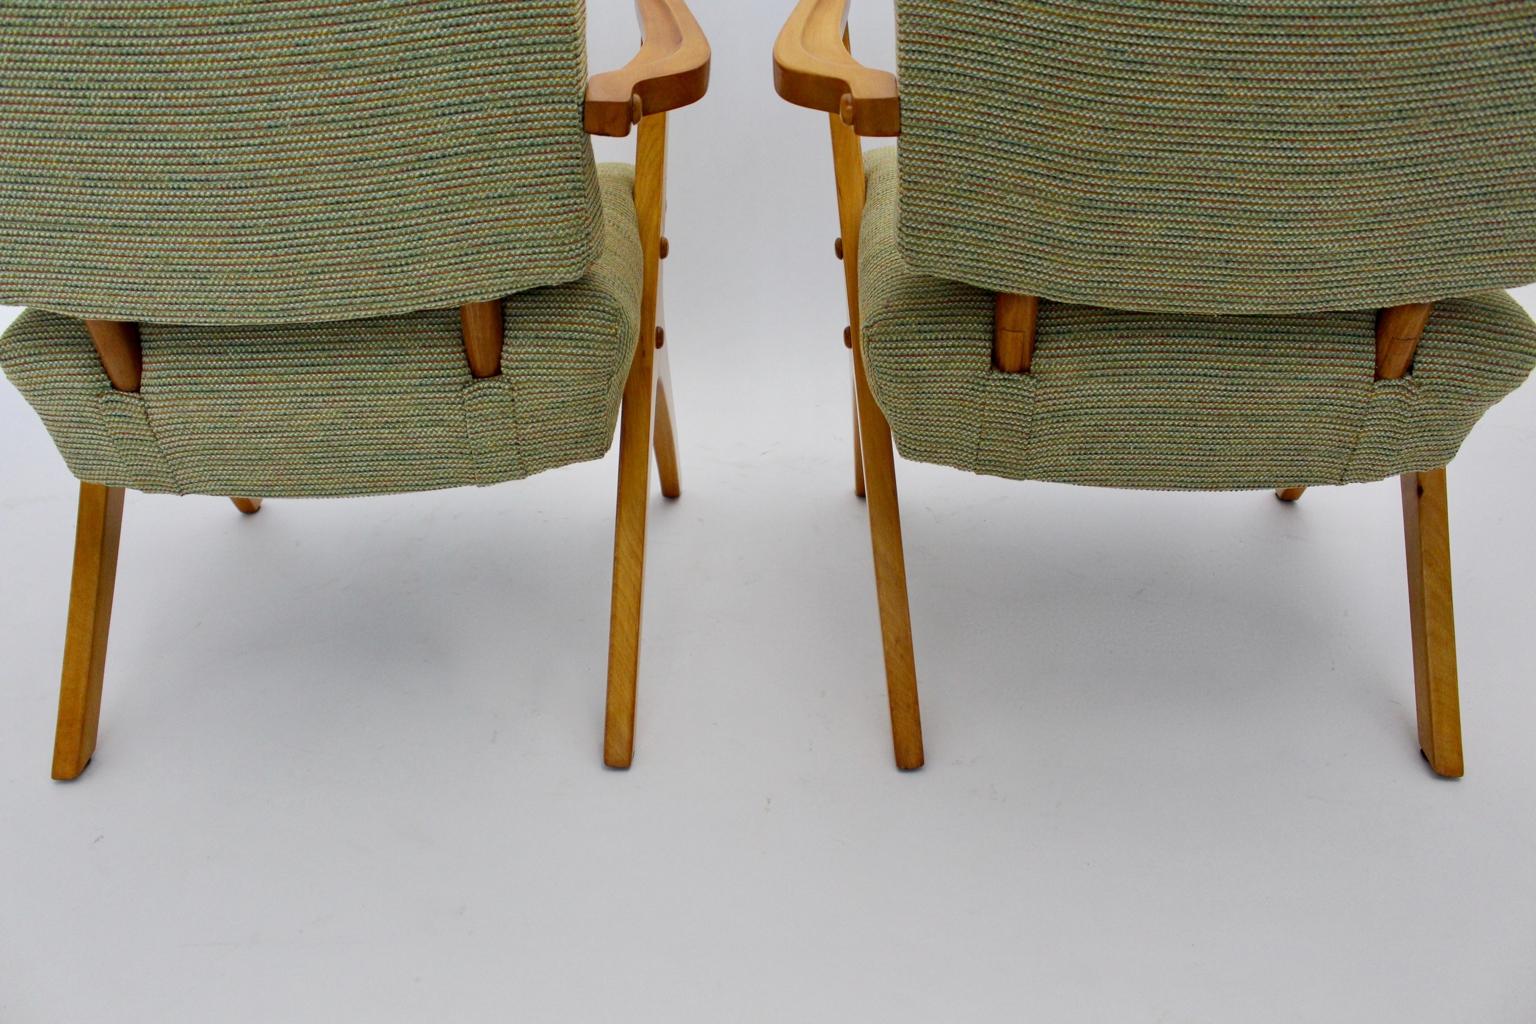 Green Beech Vintage Mid Century Modern Armchairs or Lounge Chairs Vienna, 1950s For Sale 5